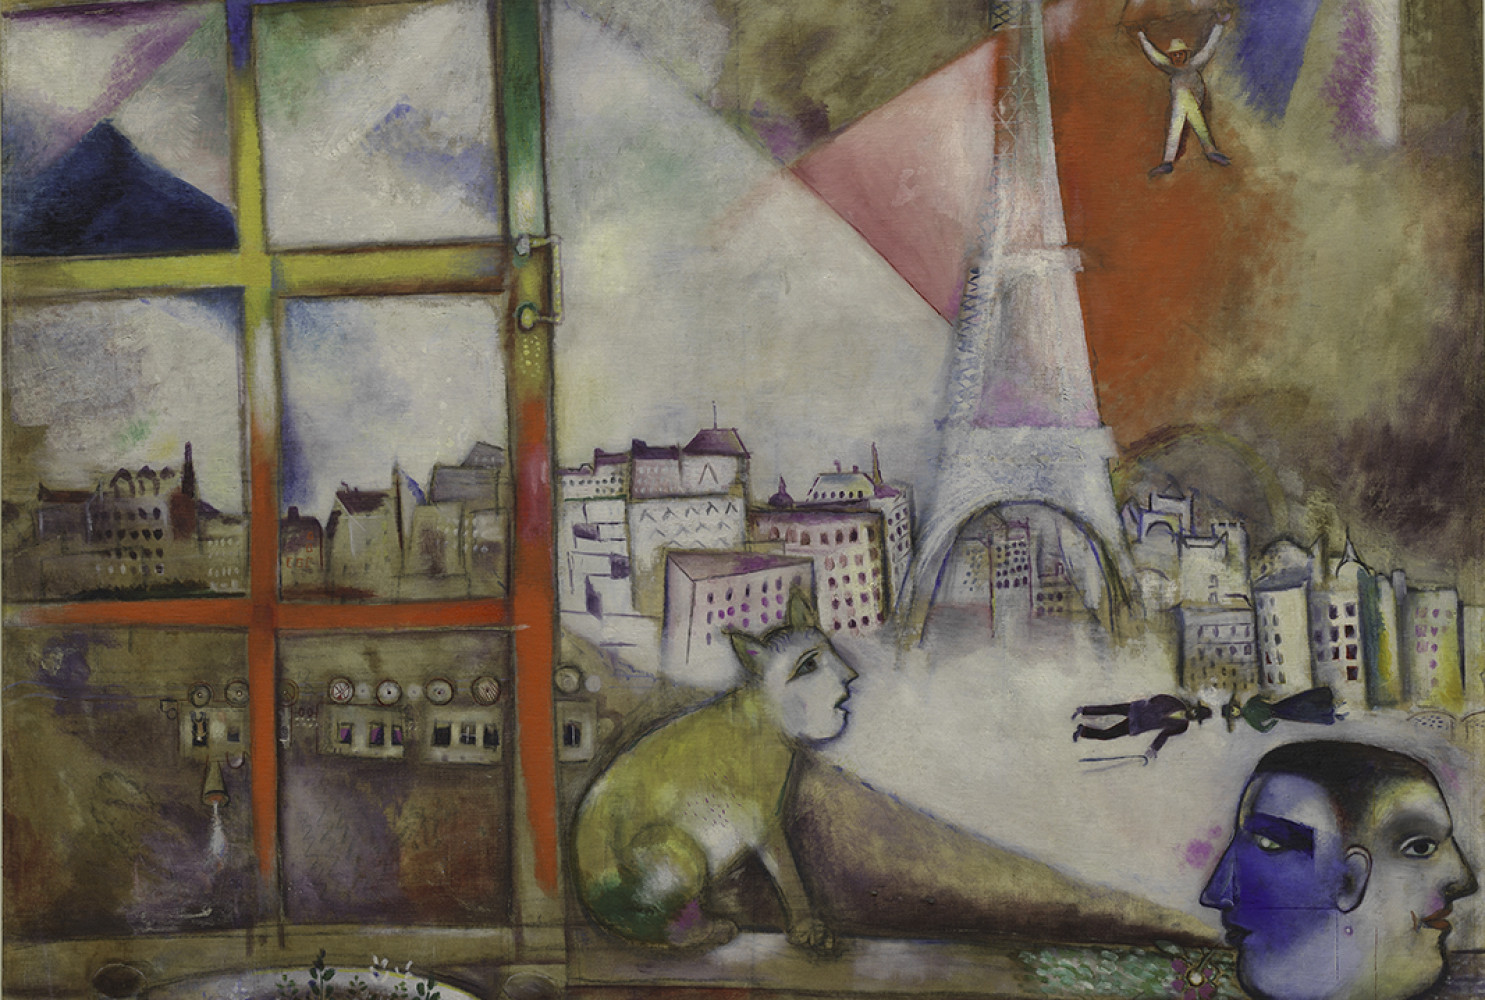 Paris Through the Window, 1913, by Marc Chagall (1887-1985); oil on canvas; 53 9/16 x 55 7/8 inches; Courtesy of the Solomon R. Guggenheim Museum, New York  © 2016 Artists Rights Society (ARS), New York / ADAGP, Paris